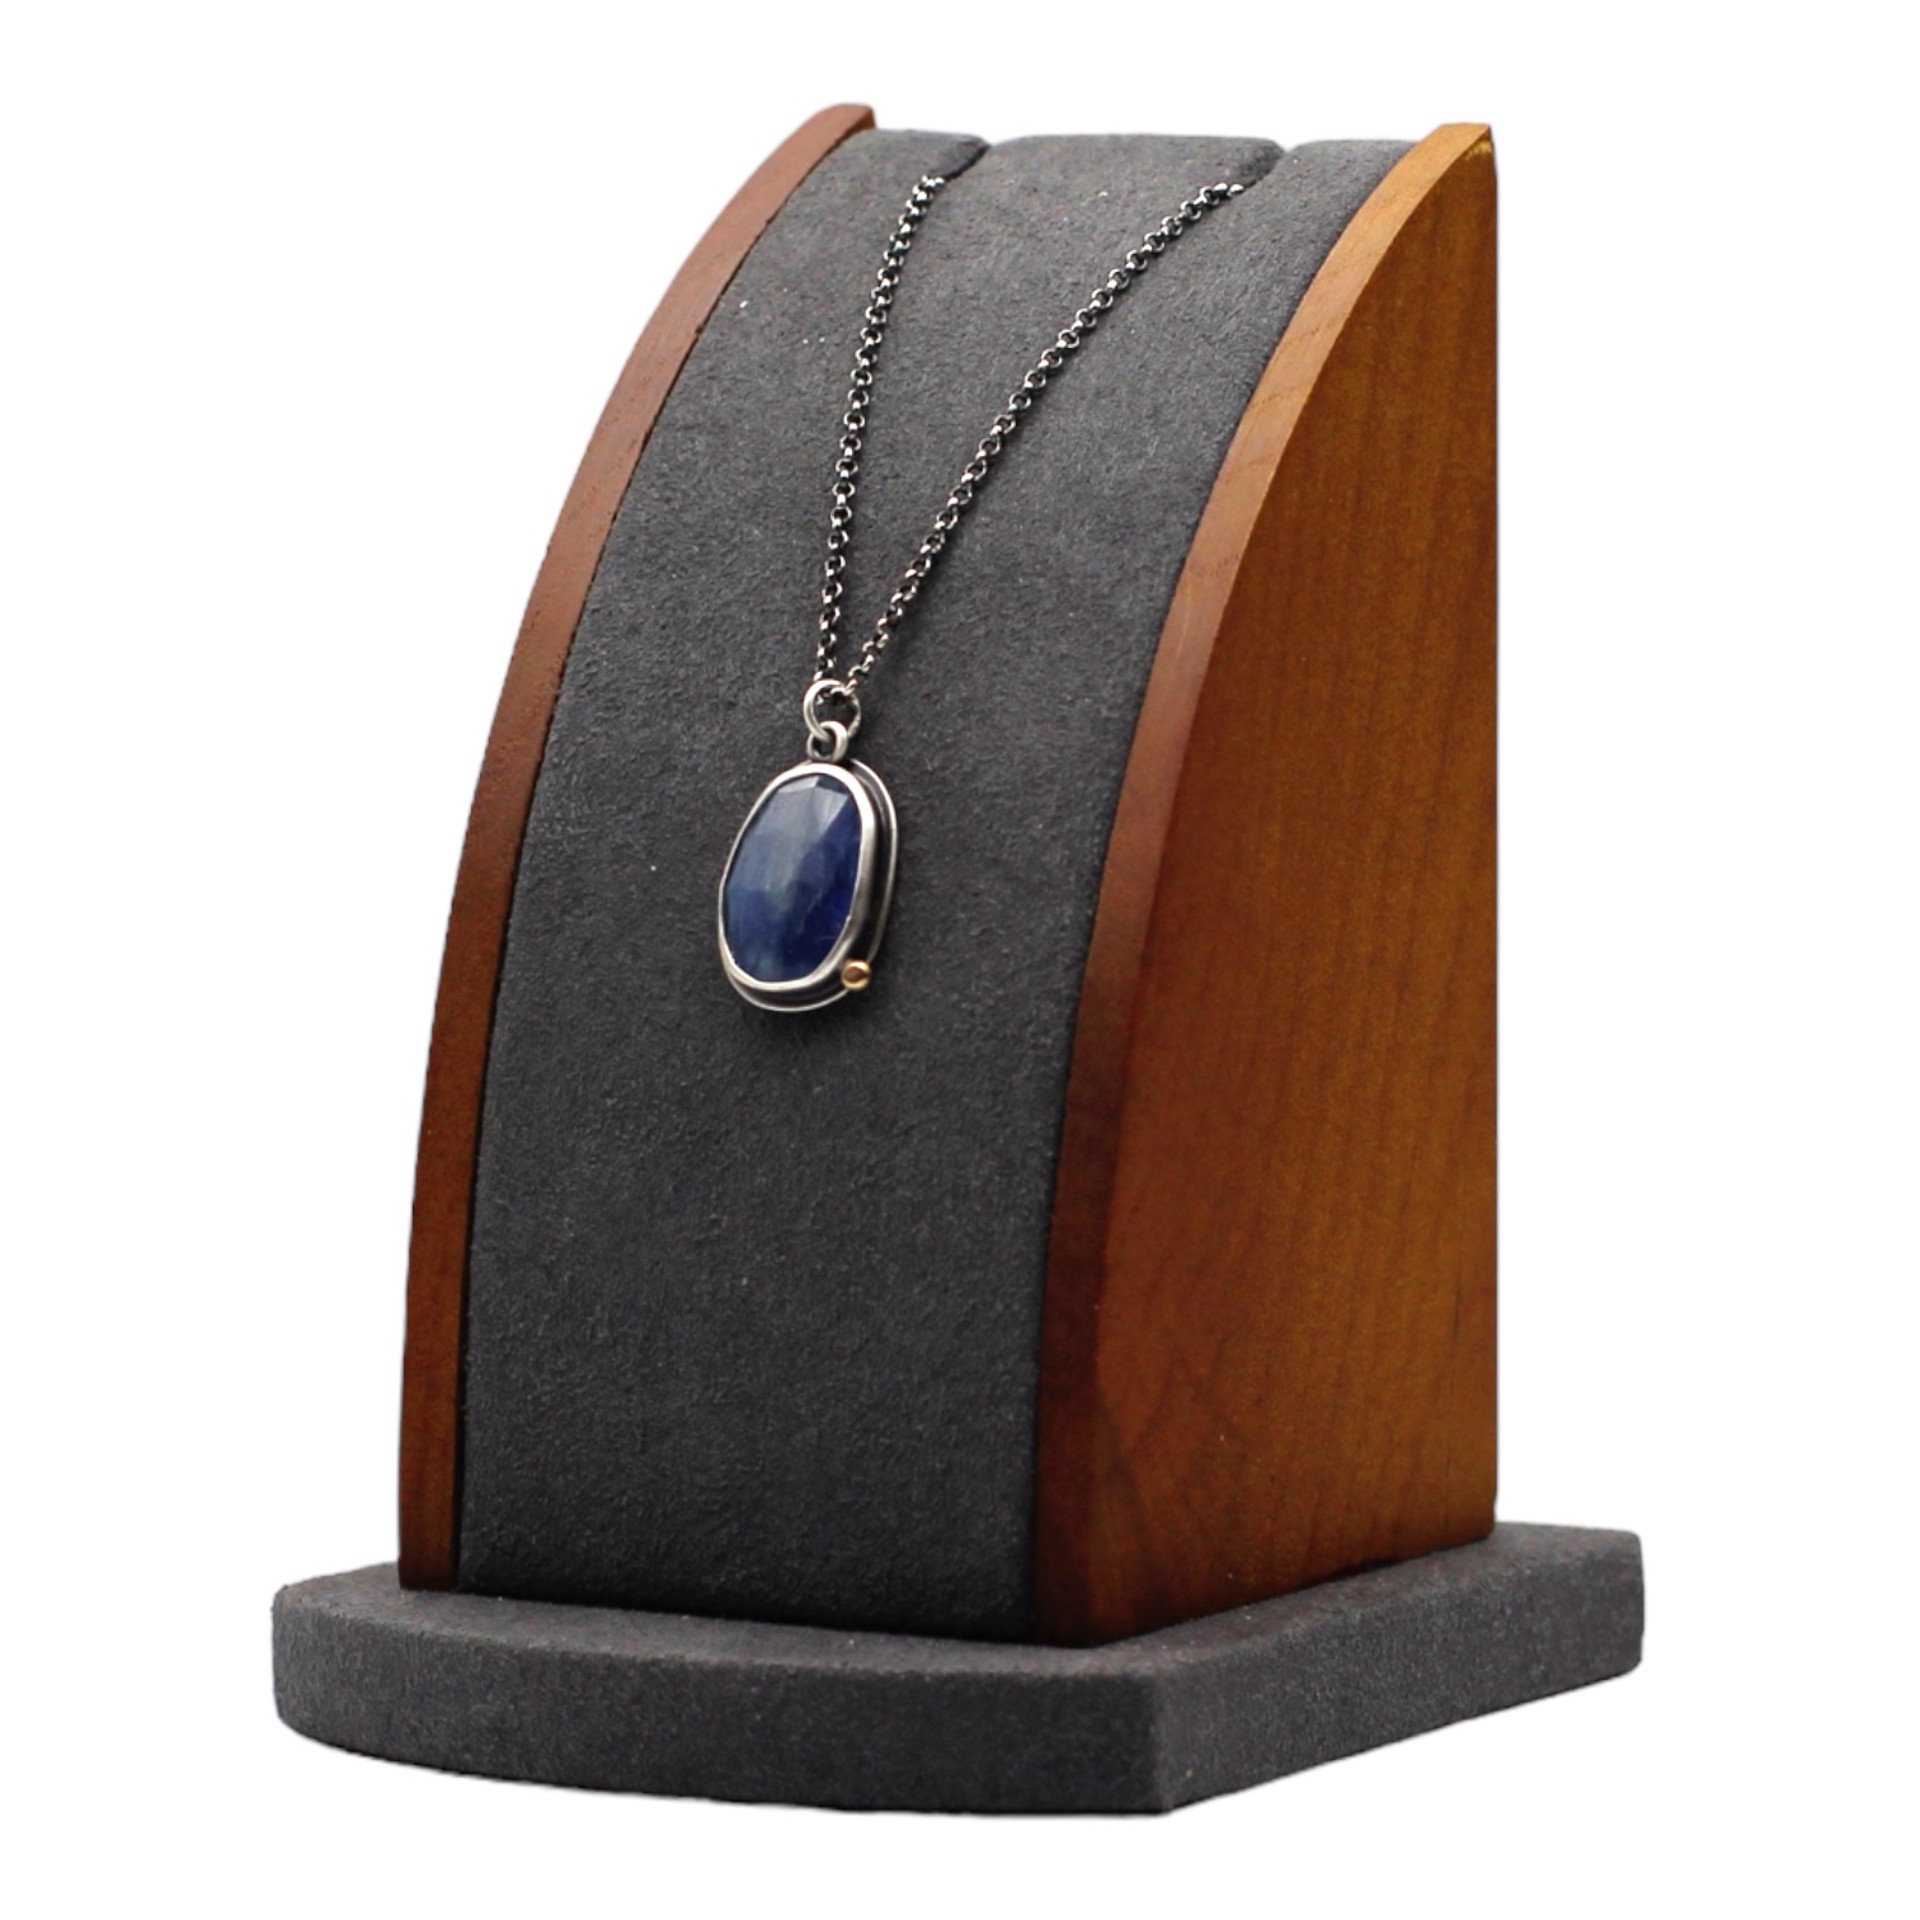 Blue Kyanite with 14k Gold Pebble Necklace  - 17"chain by Kim Knuth